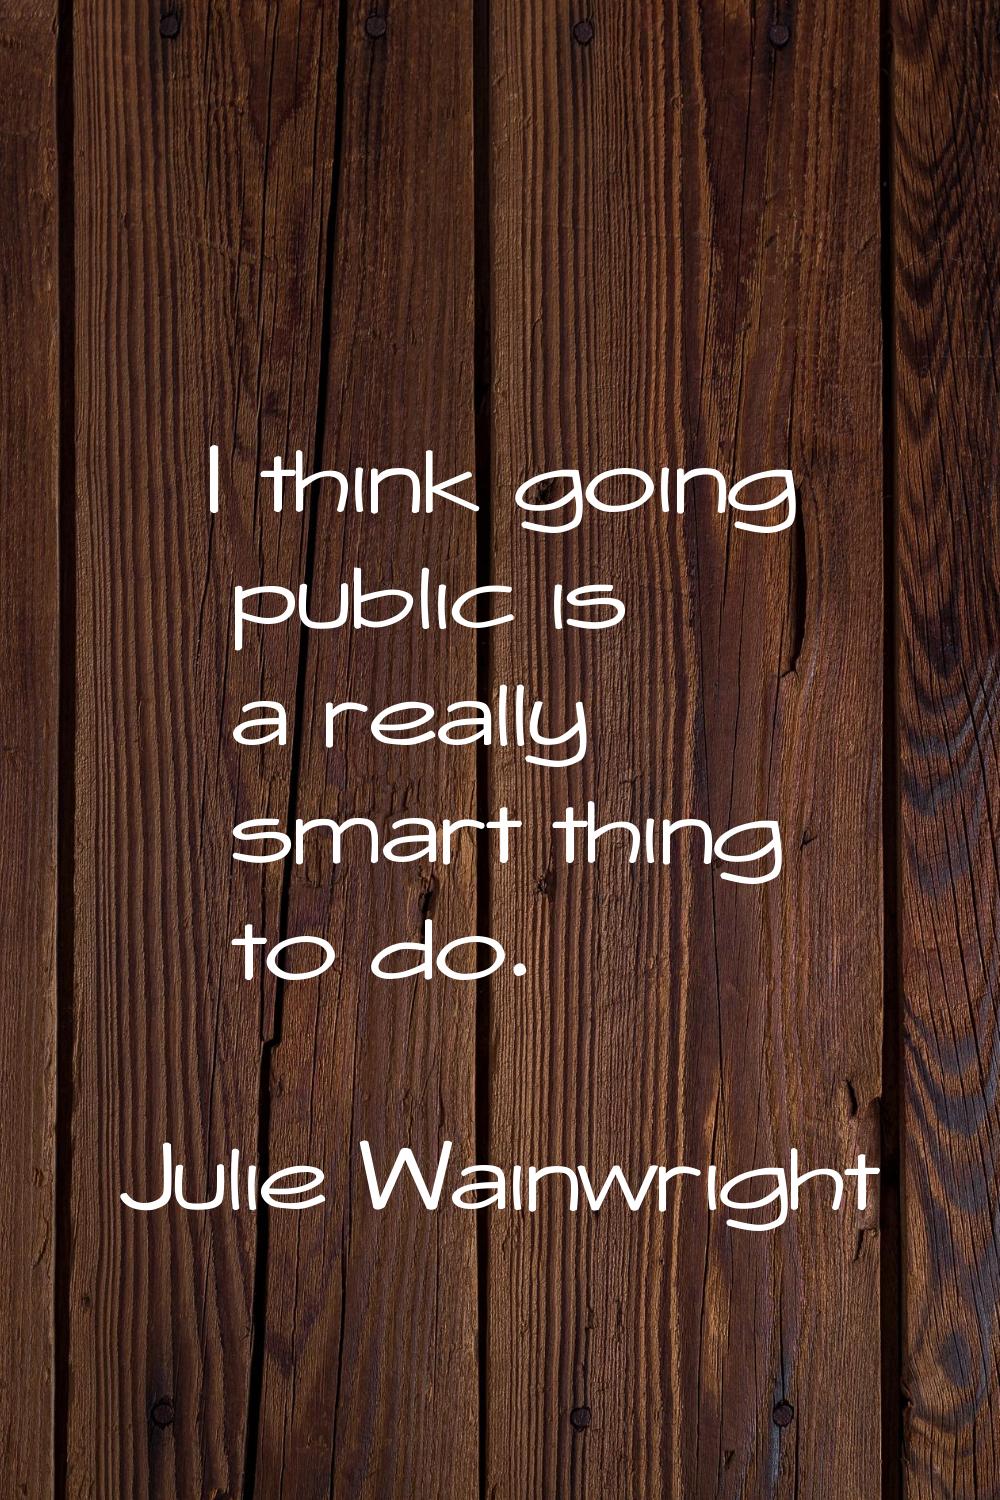 I think going public is a really smart thing to do.